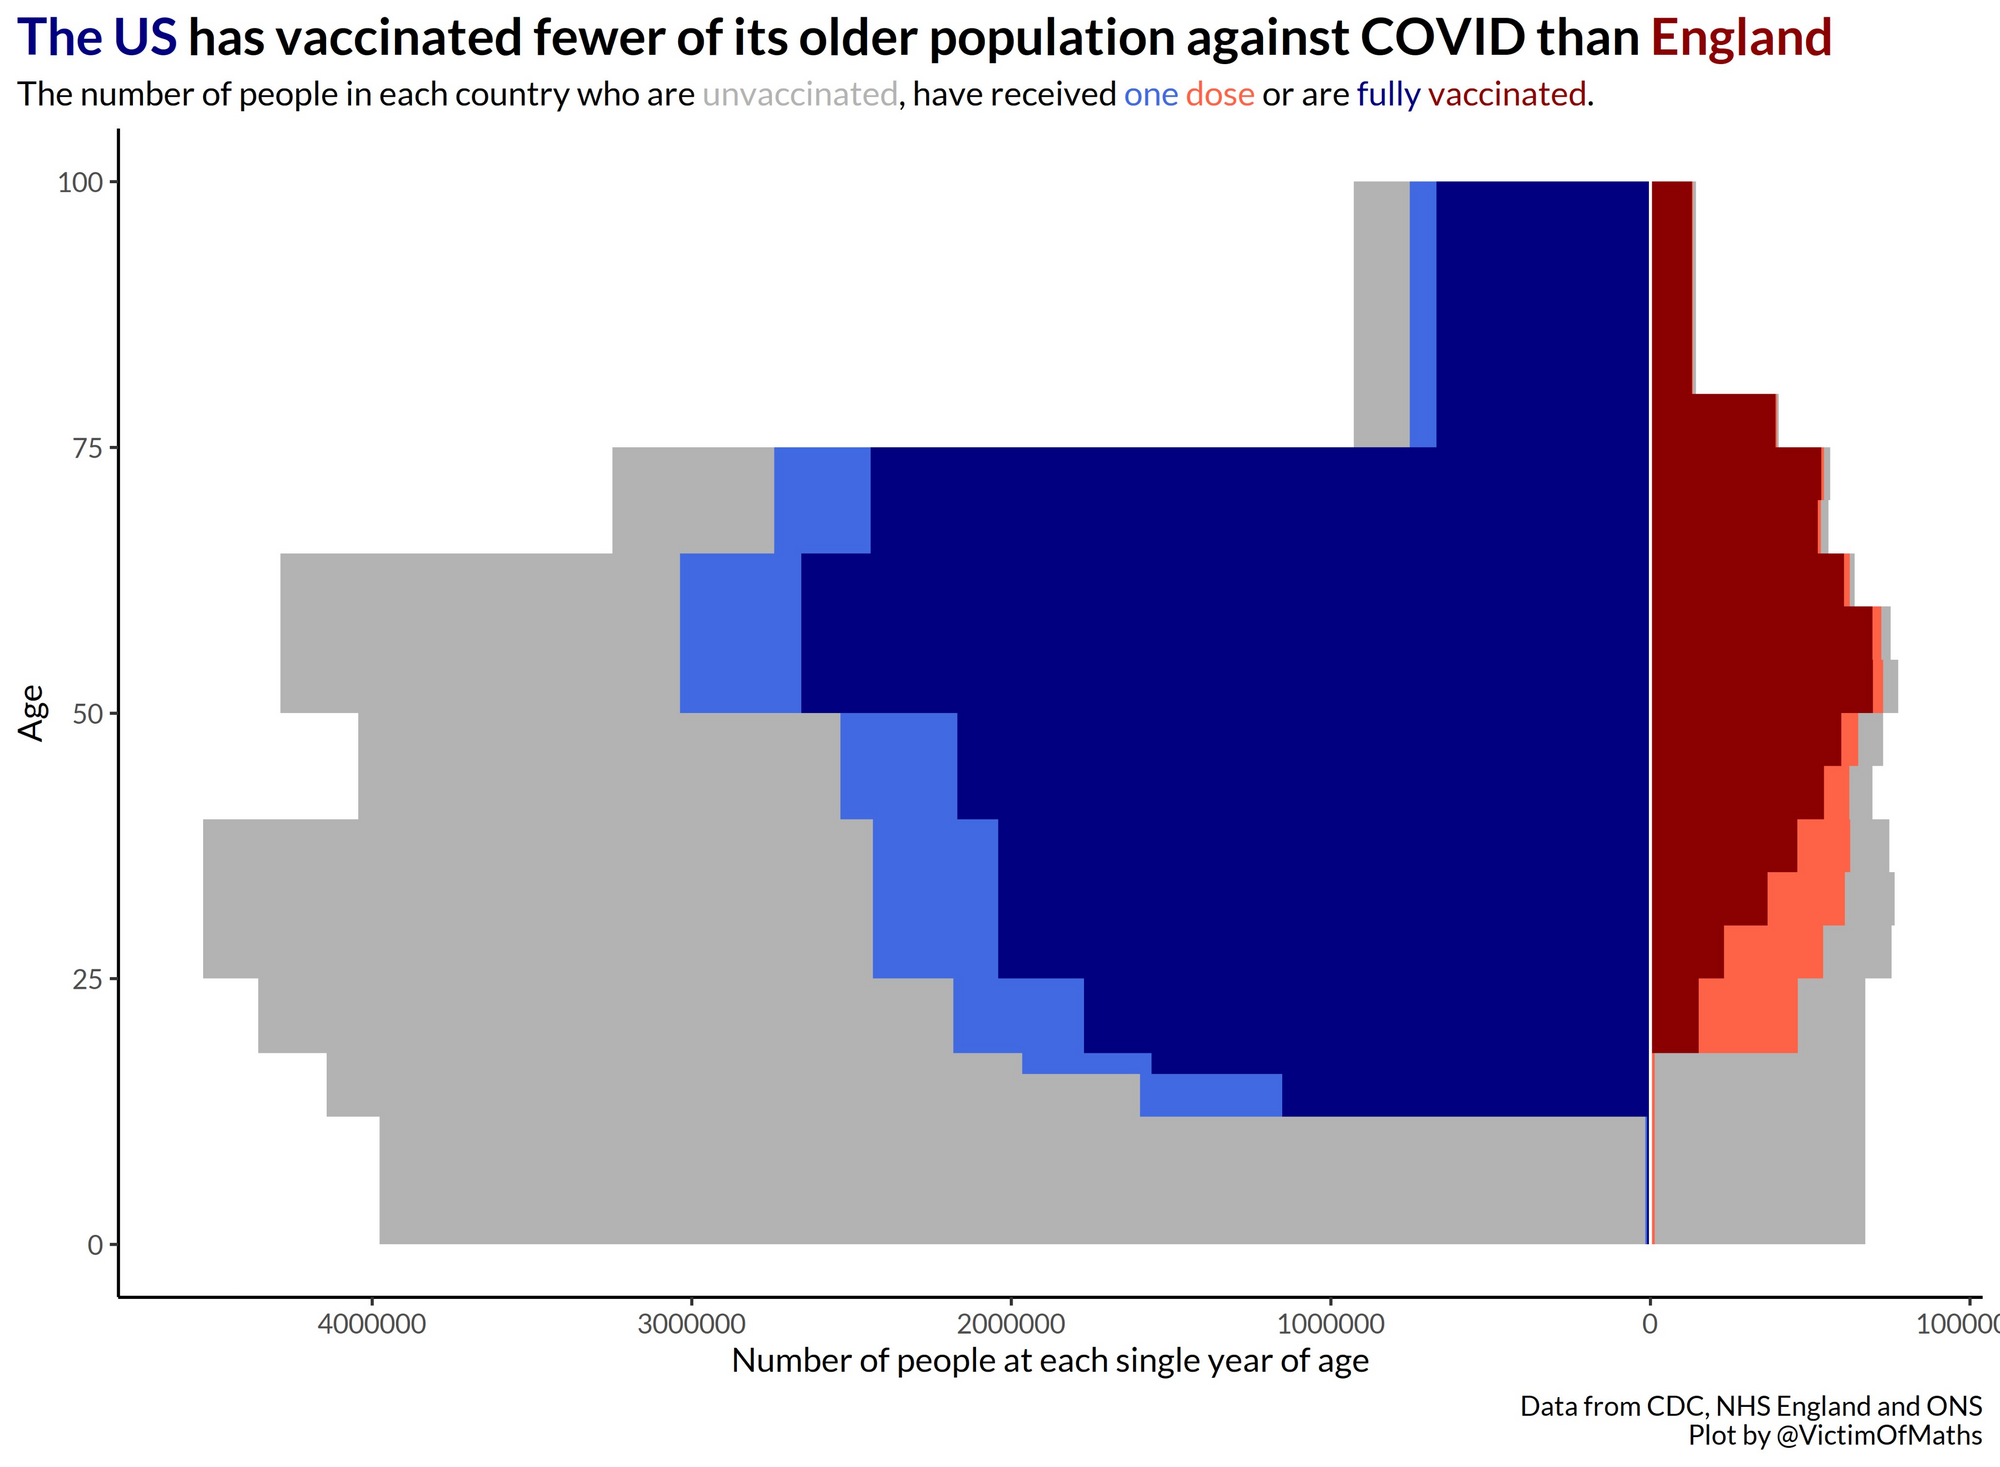 How Gaming Vaccination Statistics Can Lead to Future Lockdowns